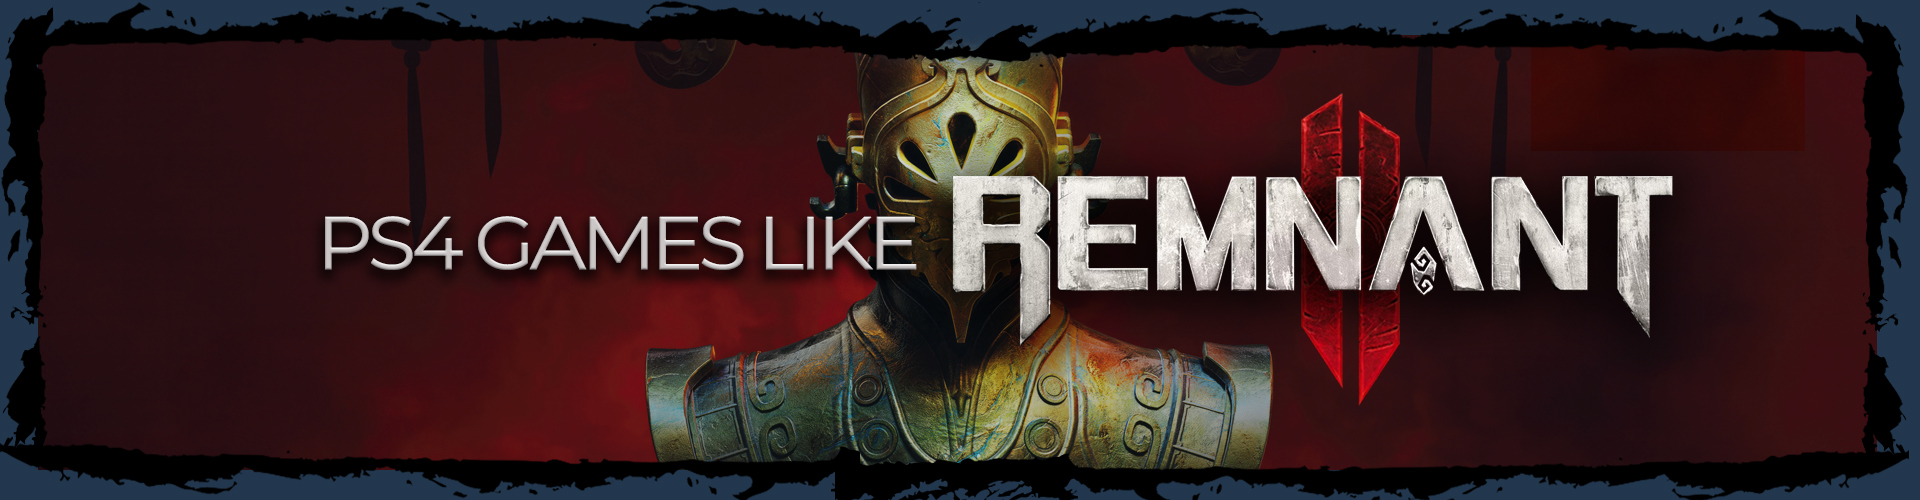 PS4 Games Like Remnant 2